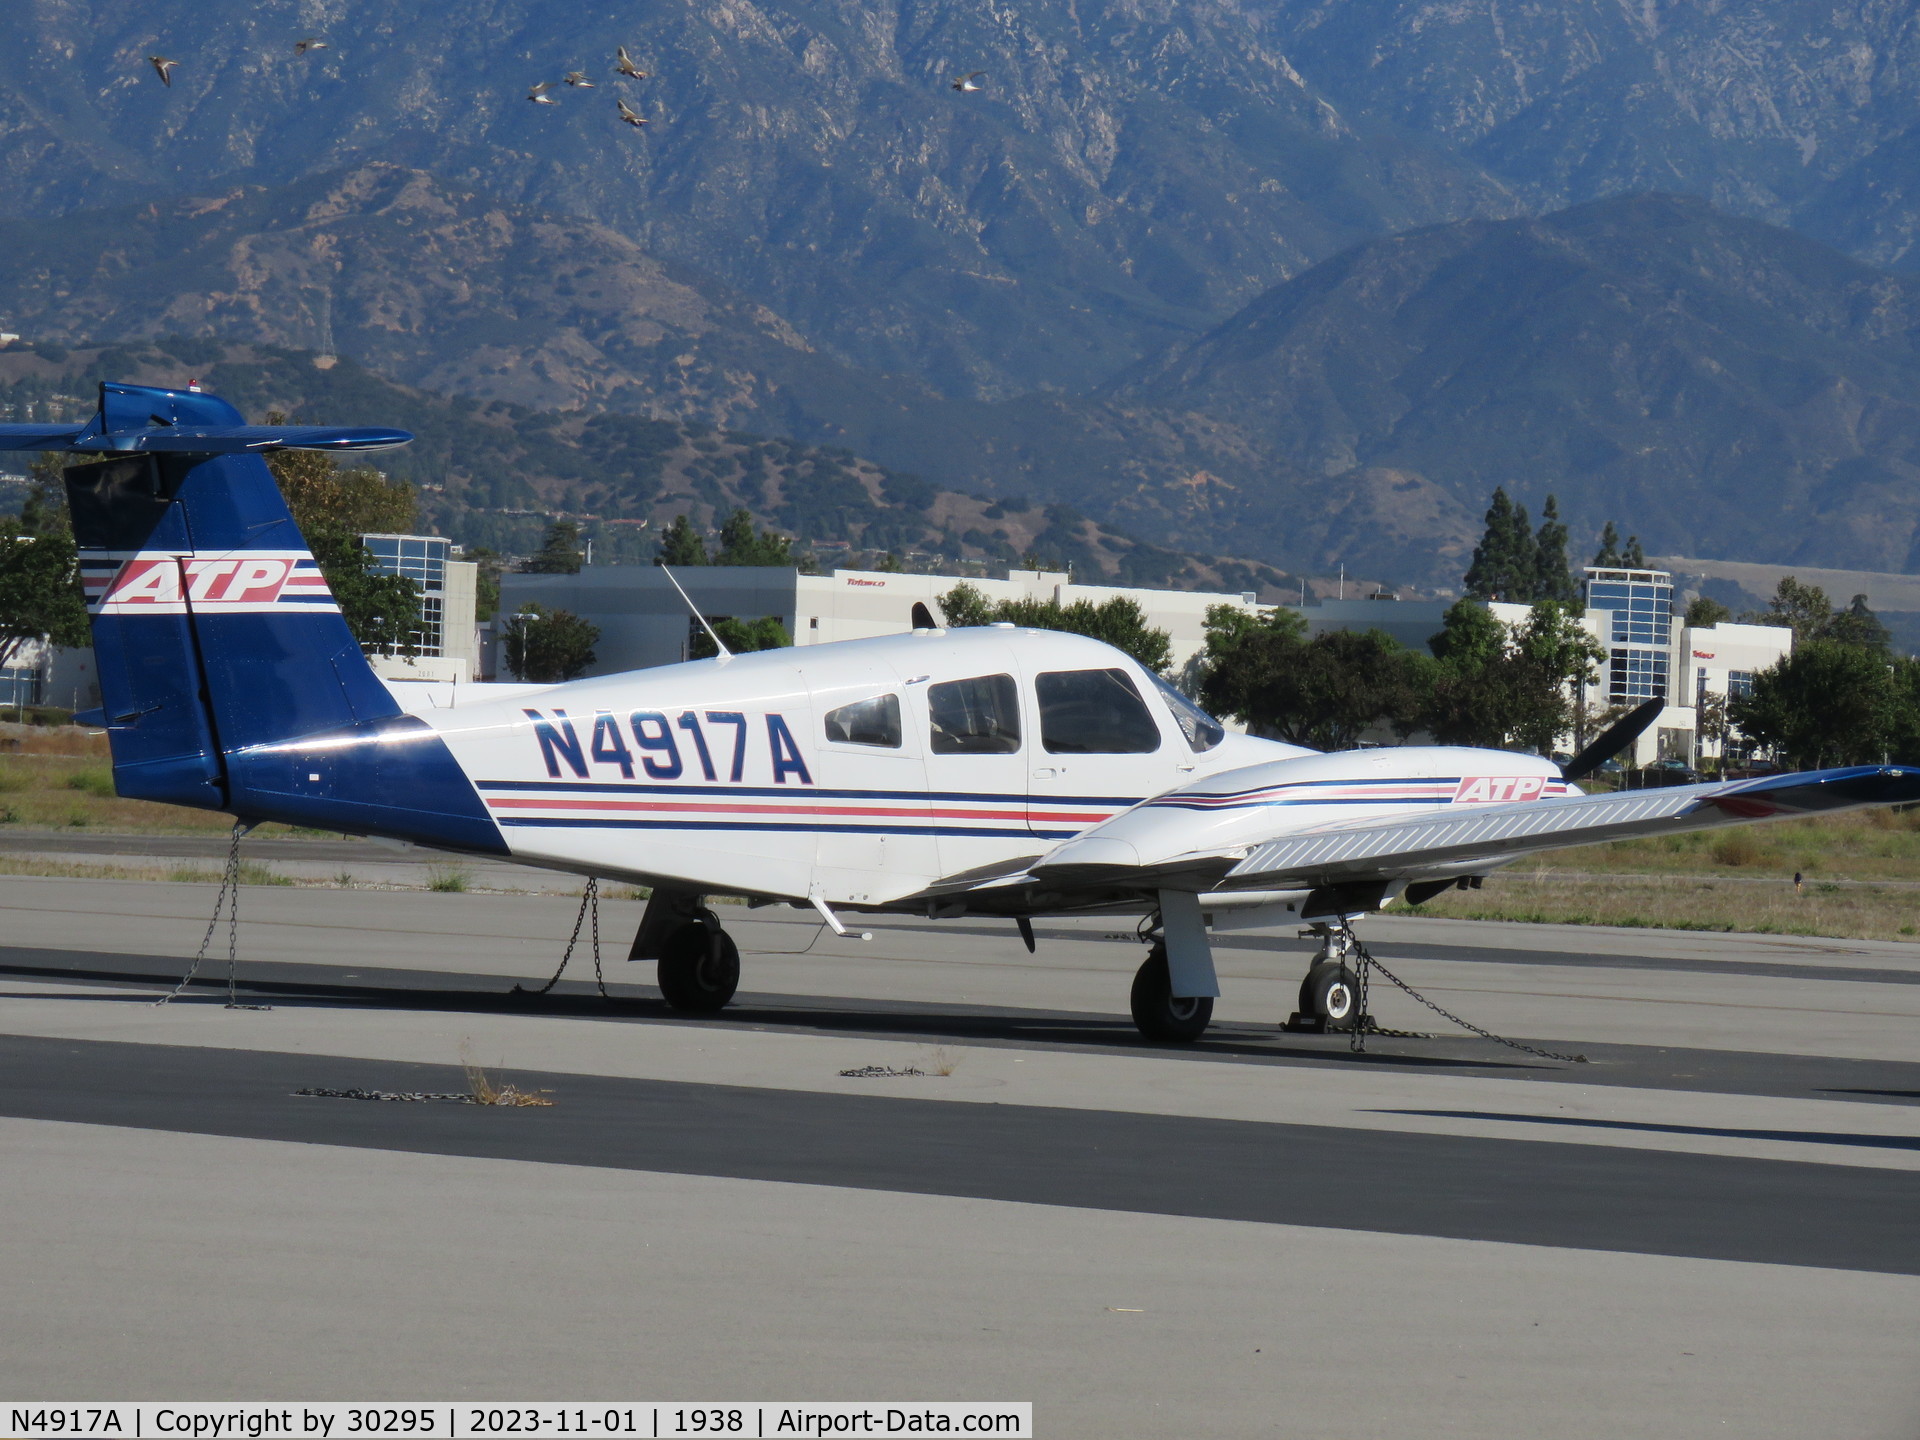 N4917A, 2008 Piper PA-44-180 Seminole C/N 4496254, Parked